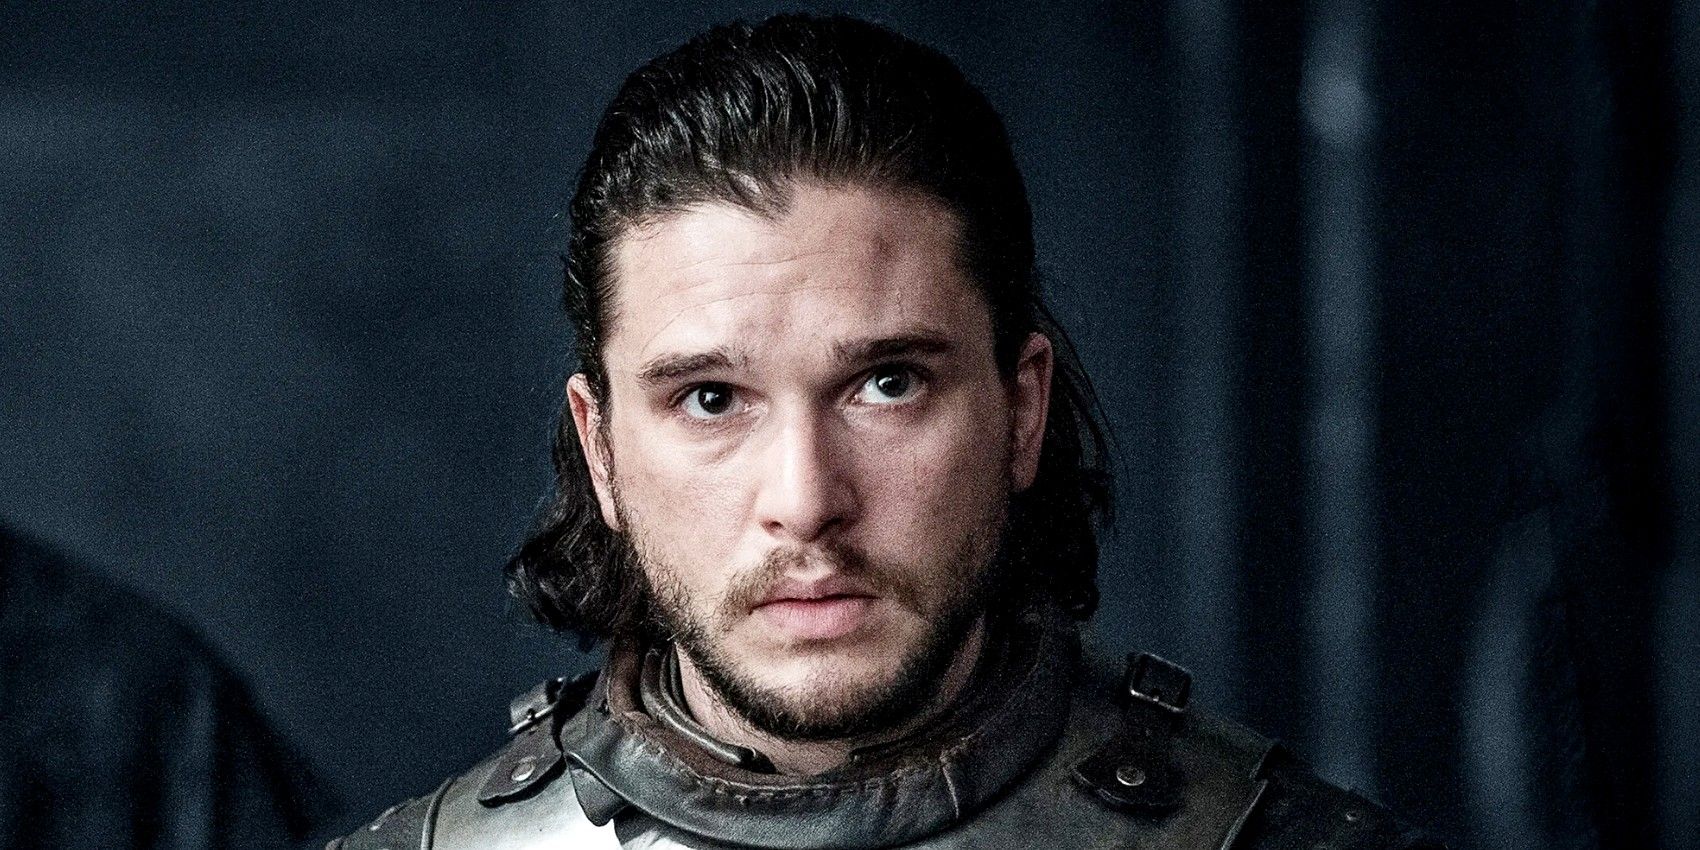 Jon Snow looking confused in Game of Thrones